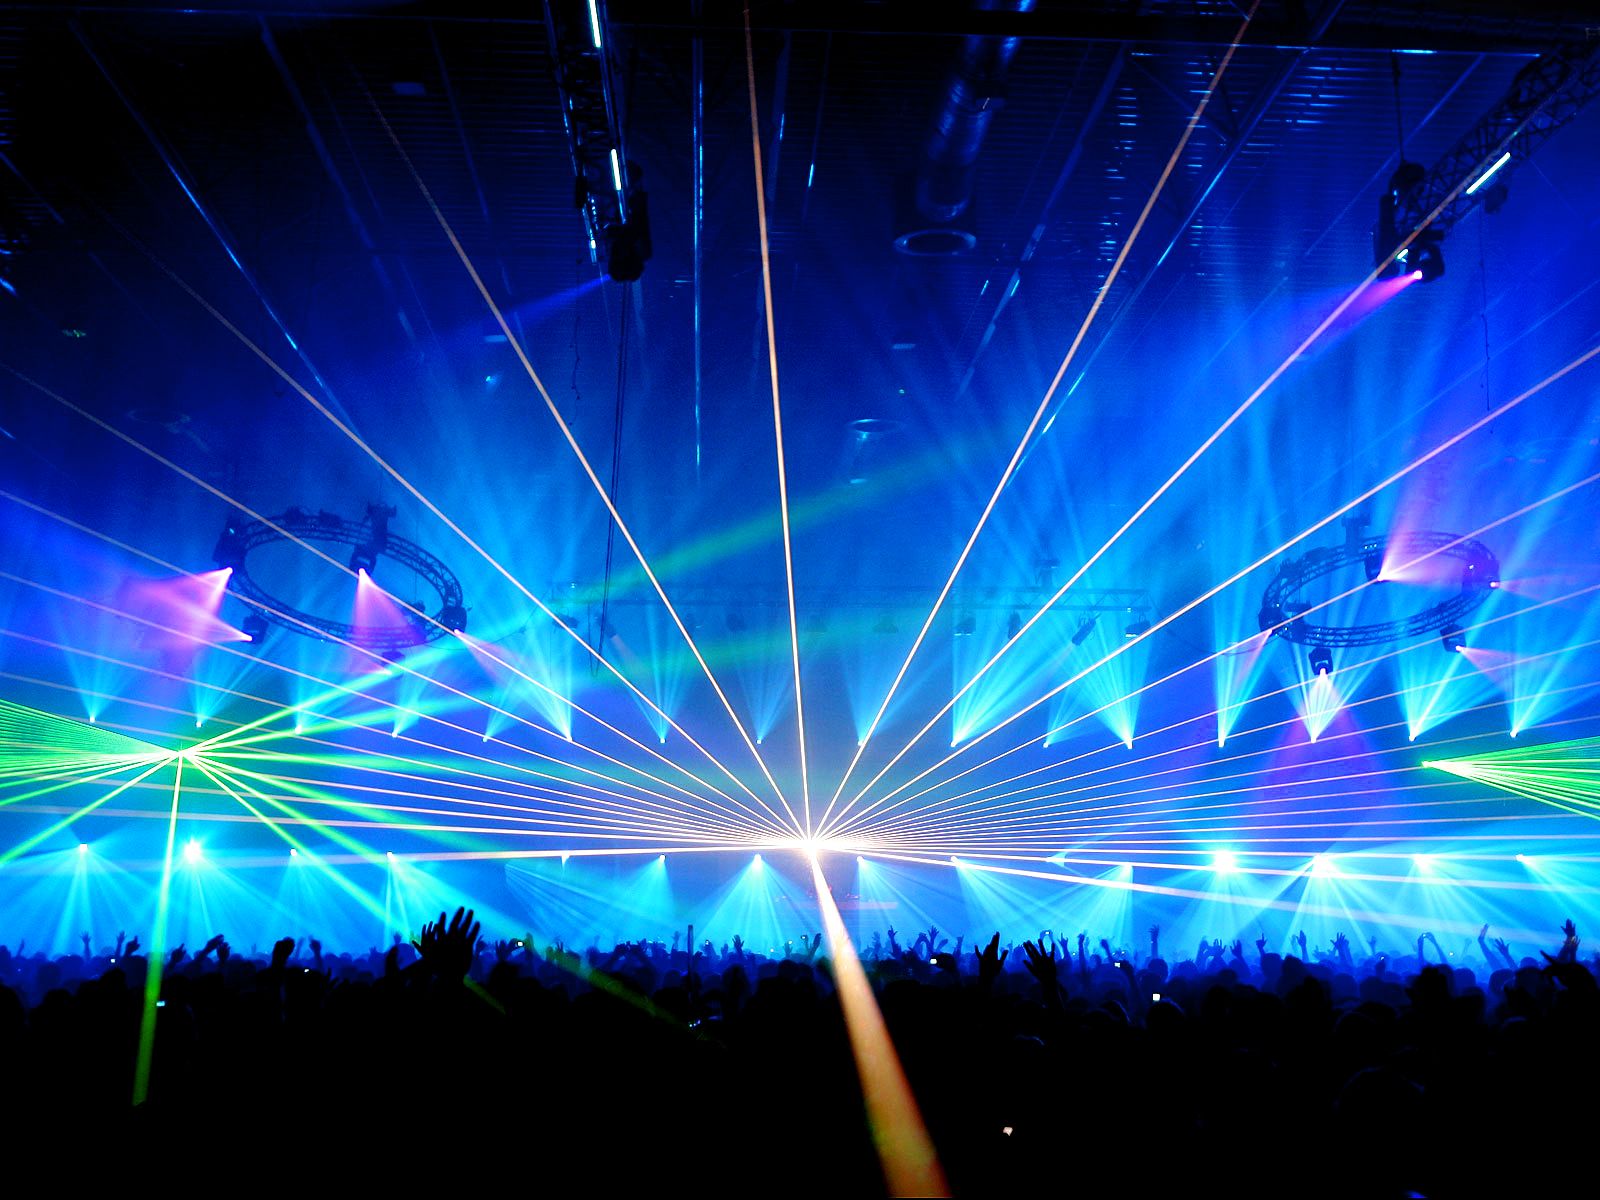 Party Wallpaper Animated Rave .wallpapertip.com